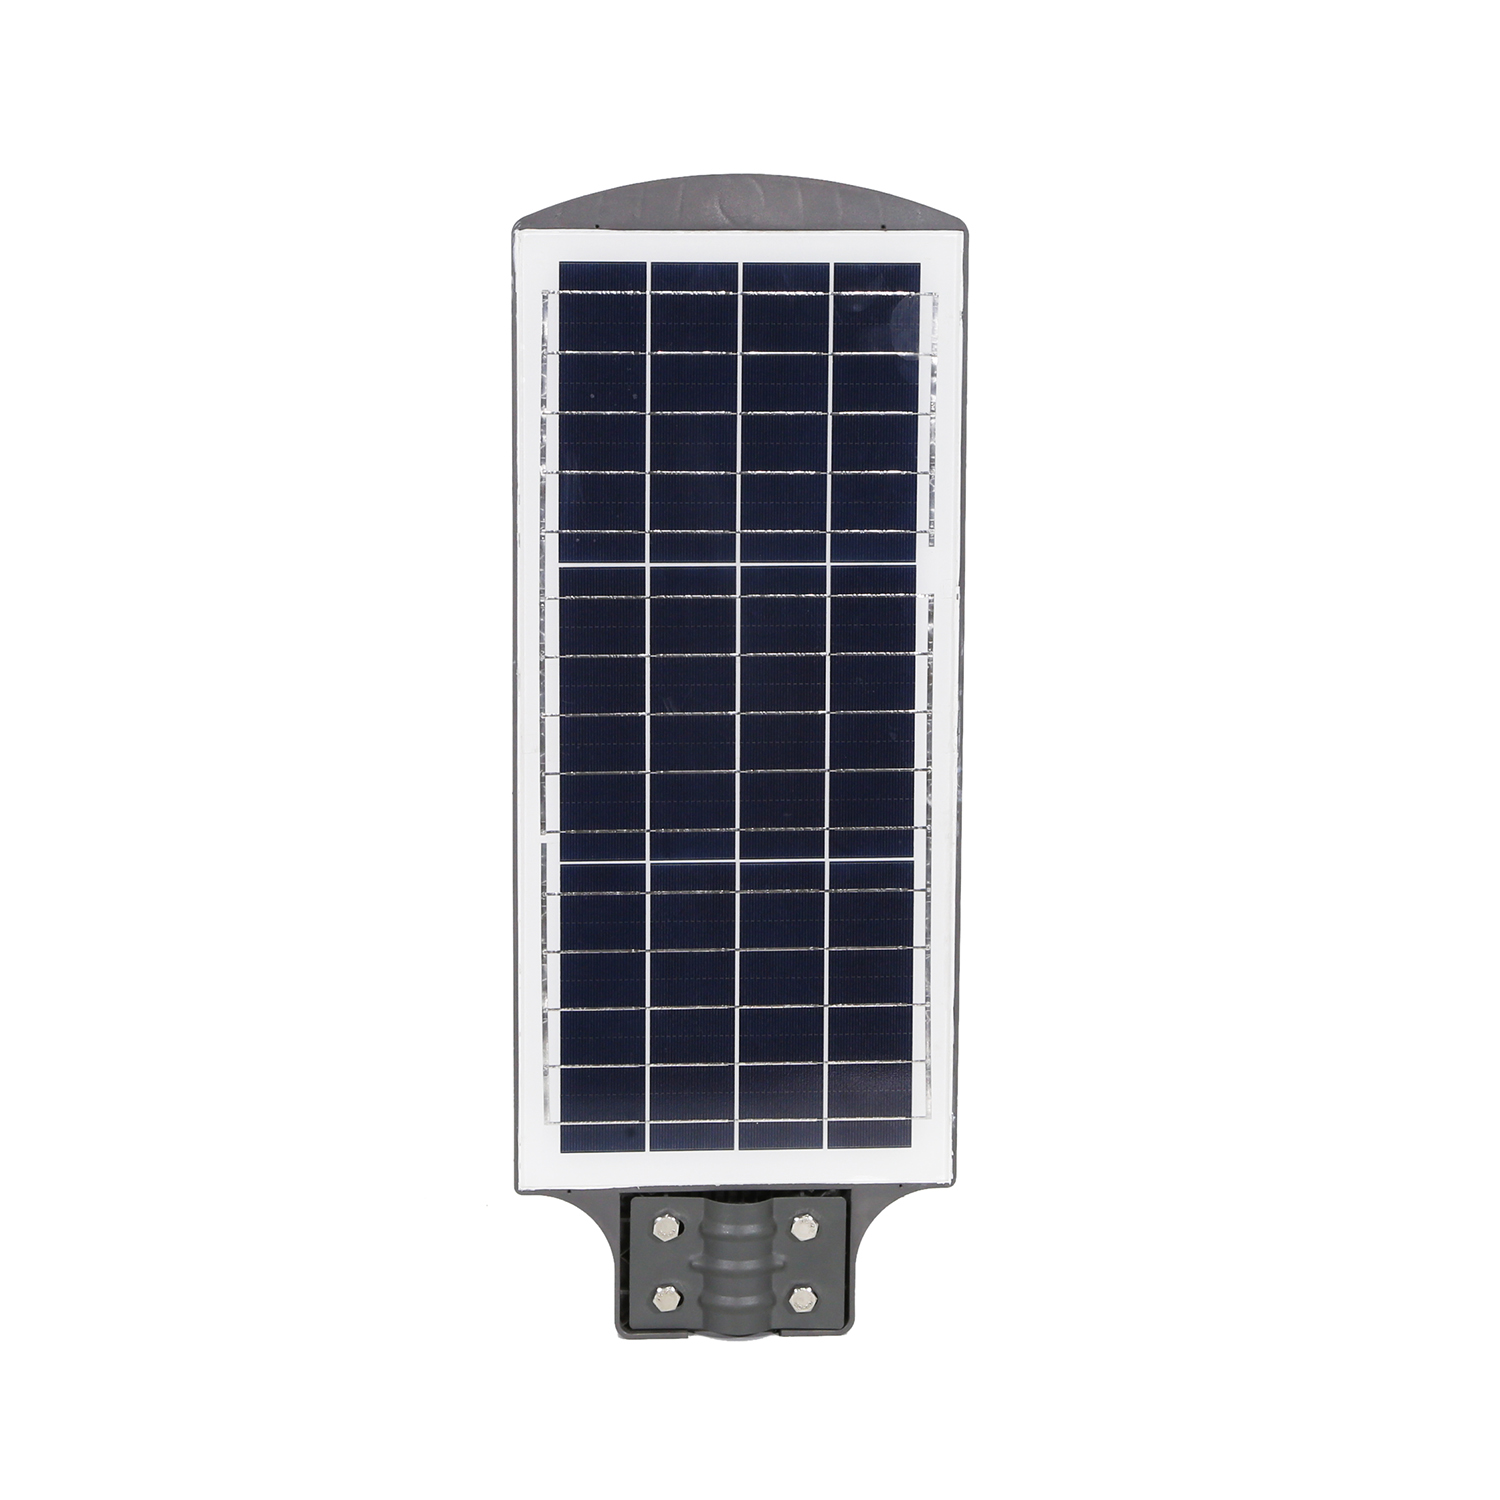 40W ABS Integrated LED Lamp All in One Solar Street Light